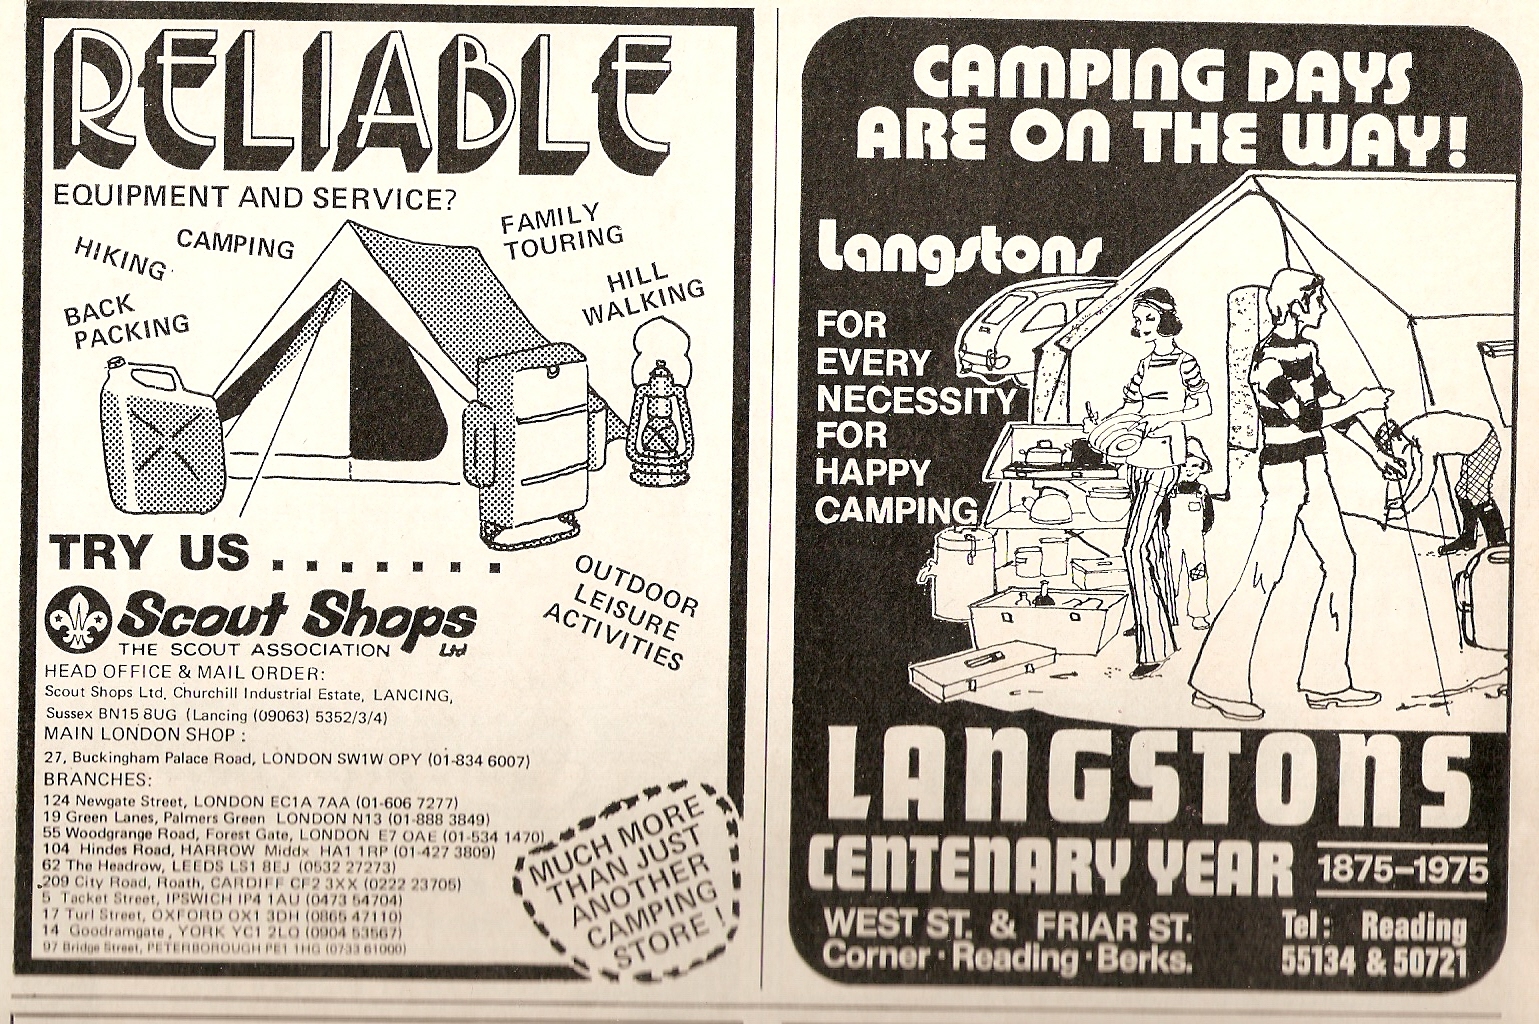 Adverts for camping equipment